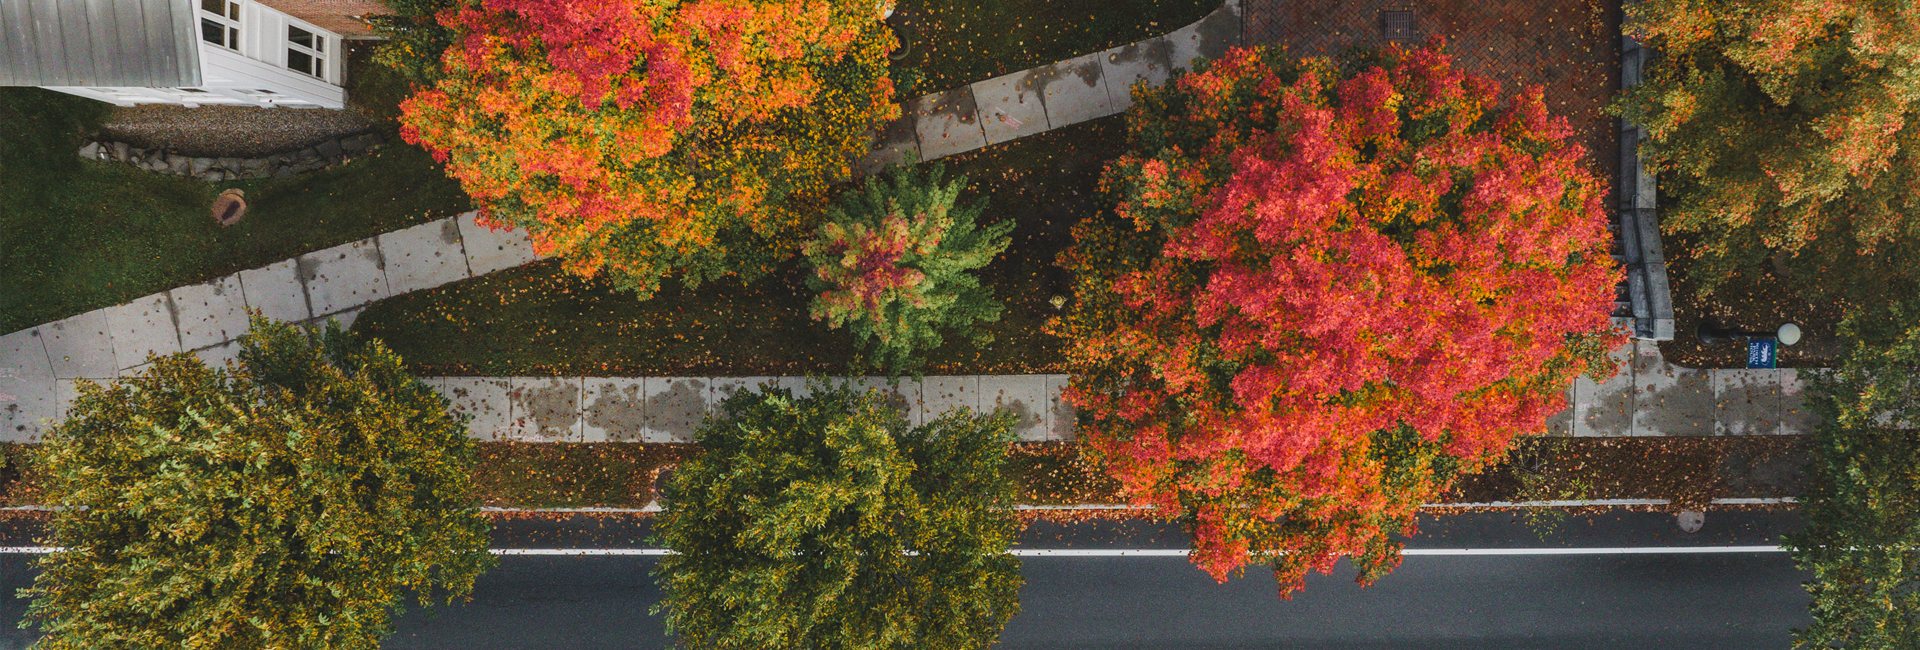 Aerial shot of fall foliage on campus